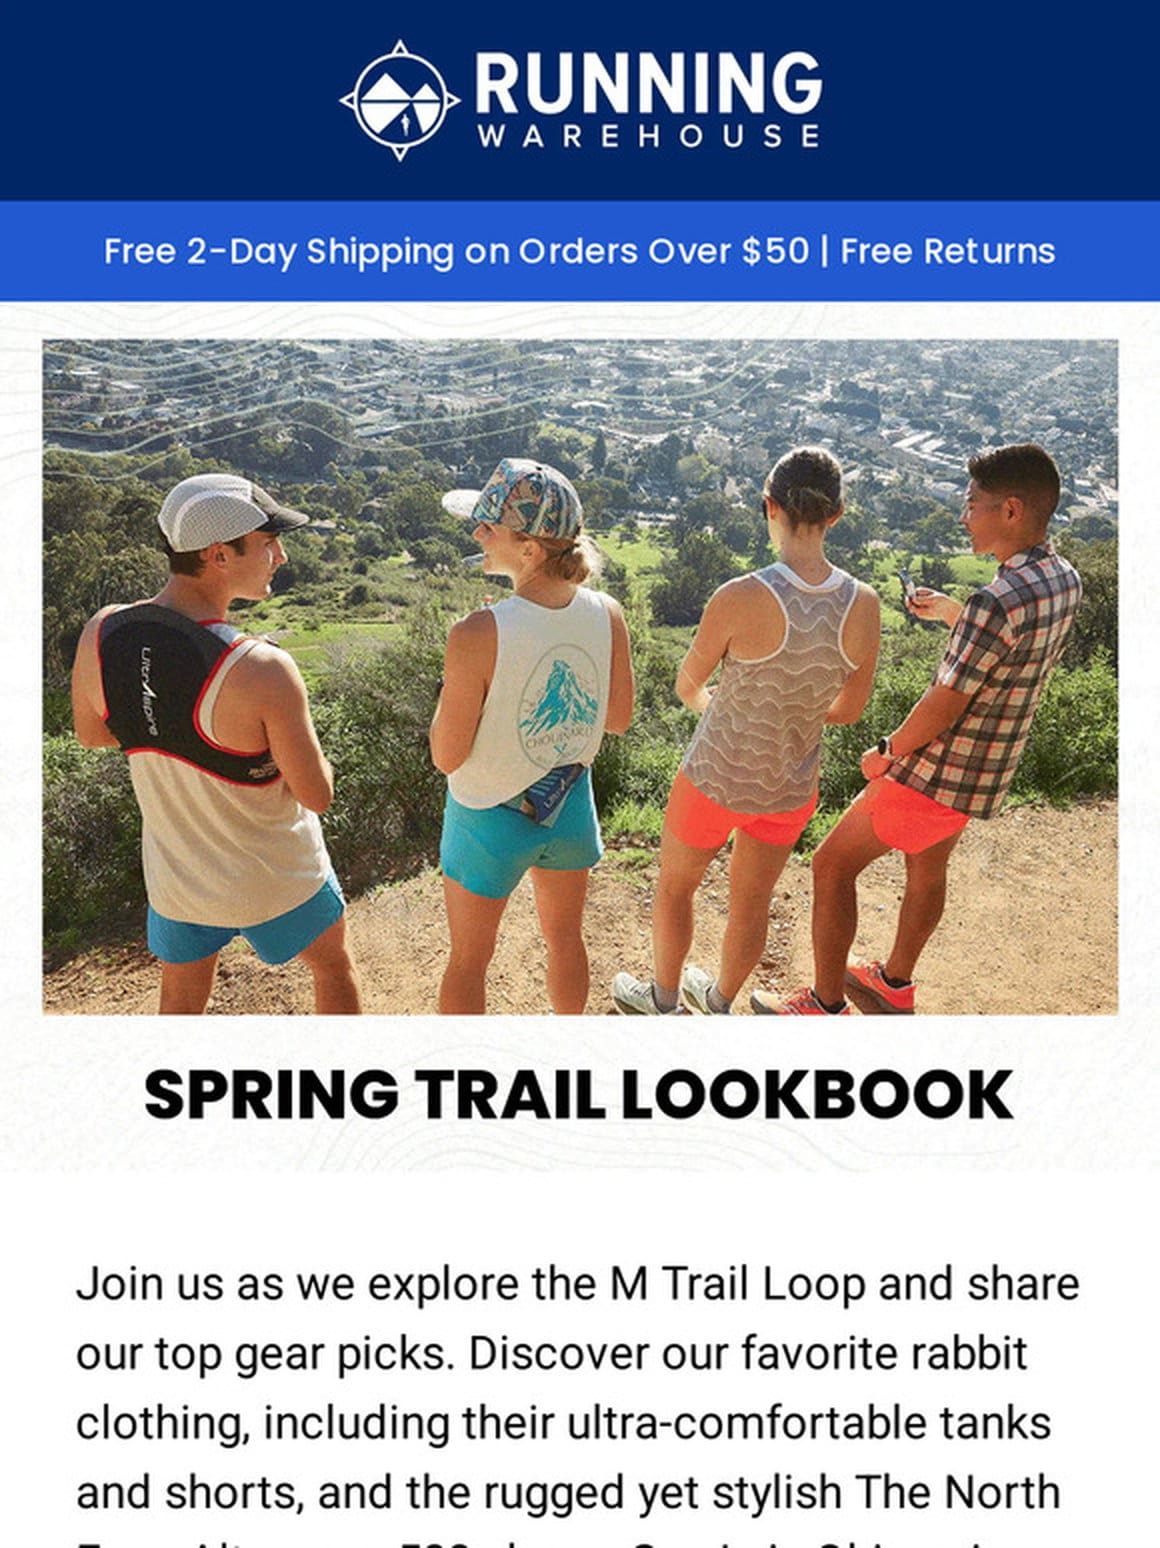 Get the Gear That Gets You on the Trail – Shop Our Lookbook!